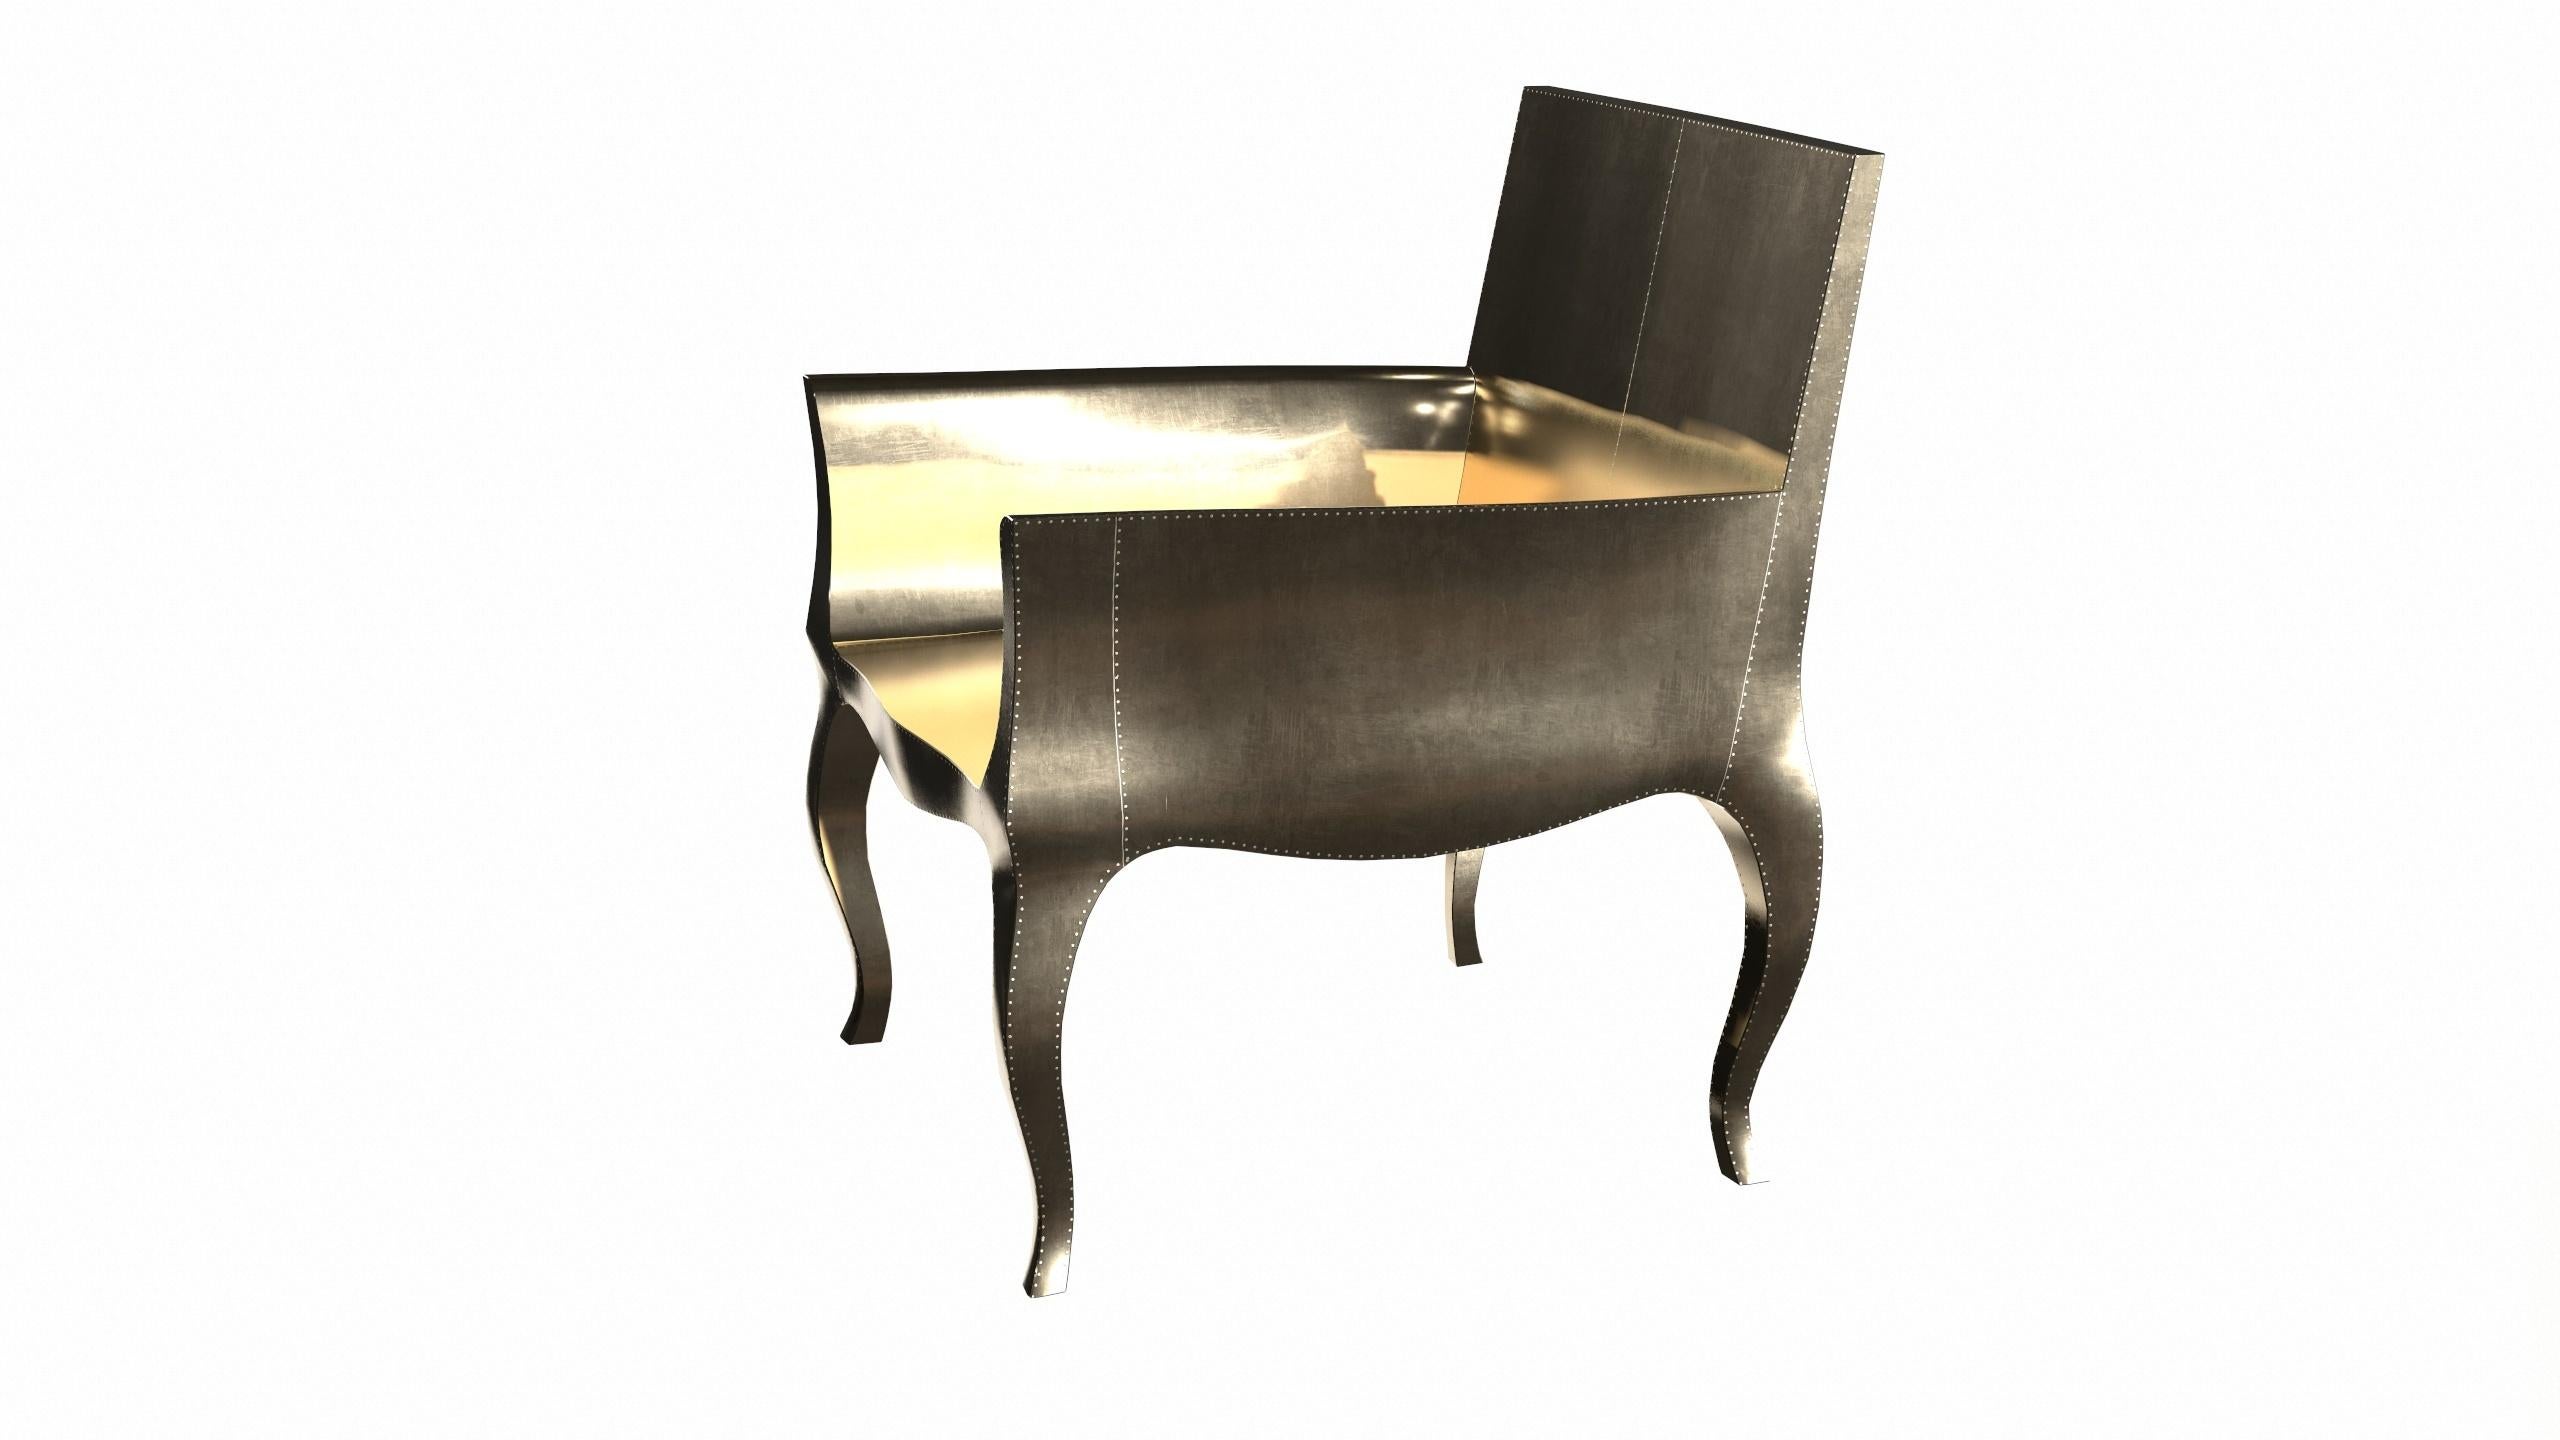 Hand-Carved Art Deco Desk Chair in Smooth Brass by Paul Mathieu for S. Odegard For Sale